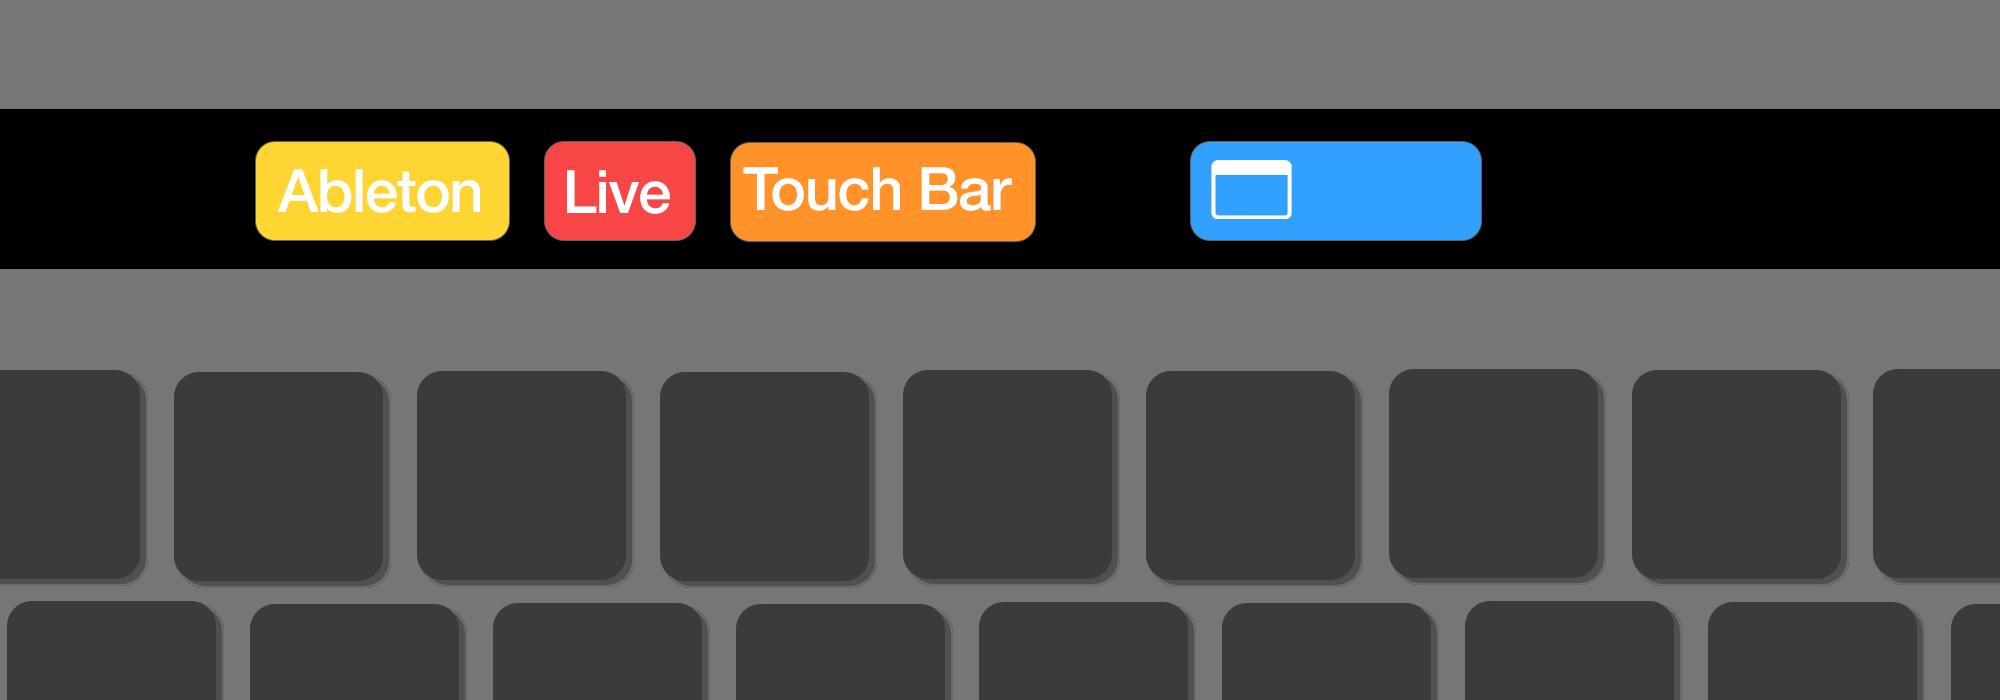 Ableton Live Touch Bar for MacBook Pros — pATCHES